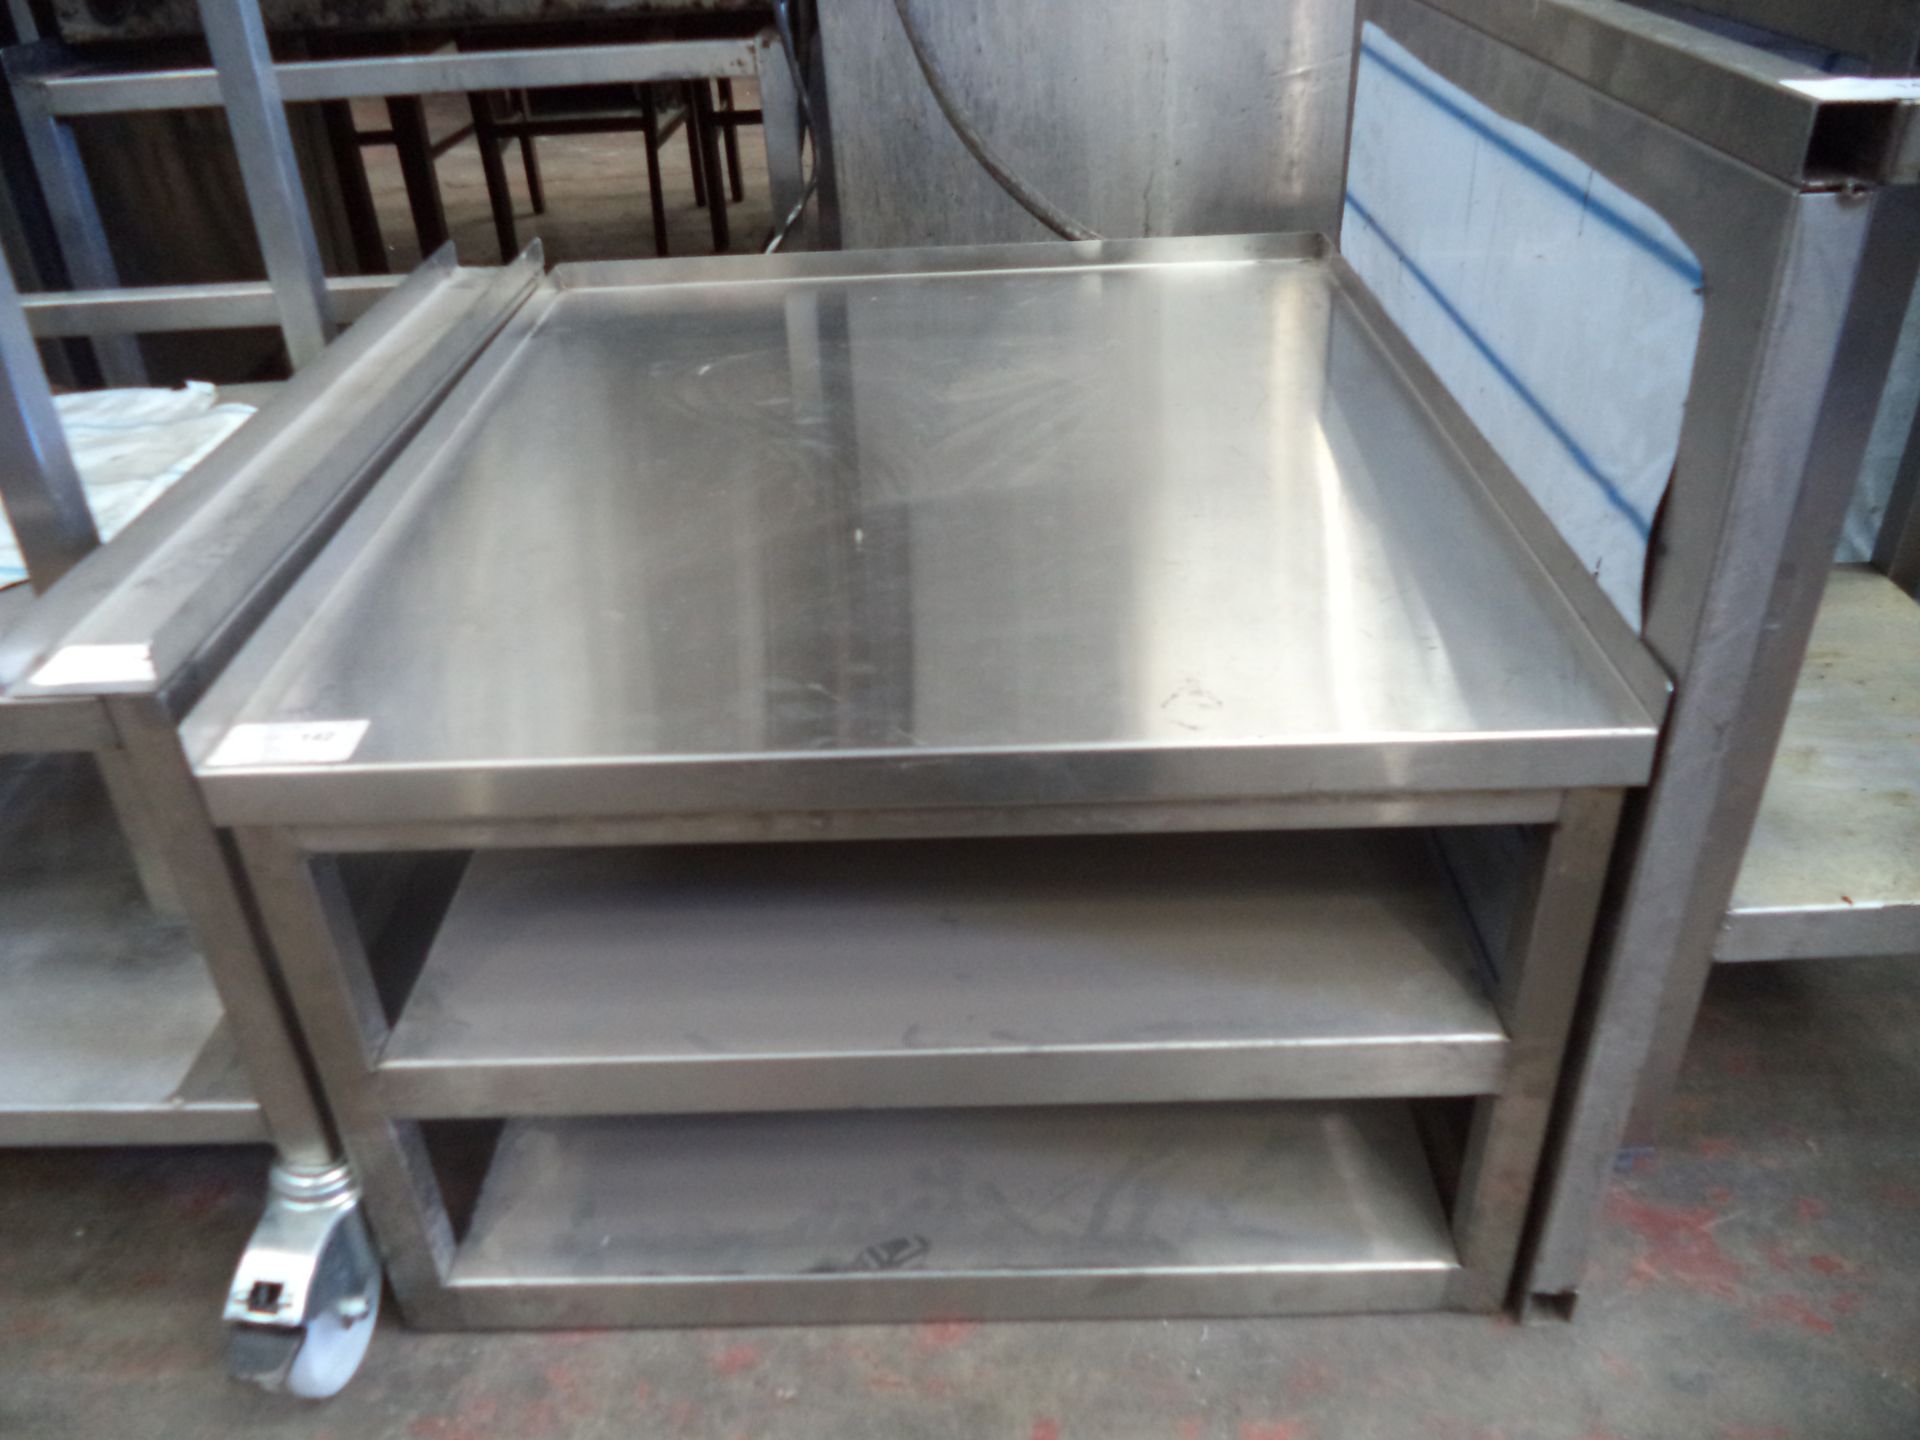 Table Top 2FT x 3FT S/S Griddle Stand